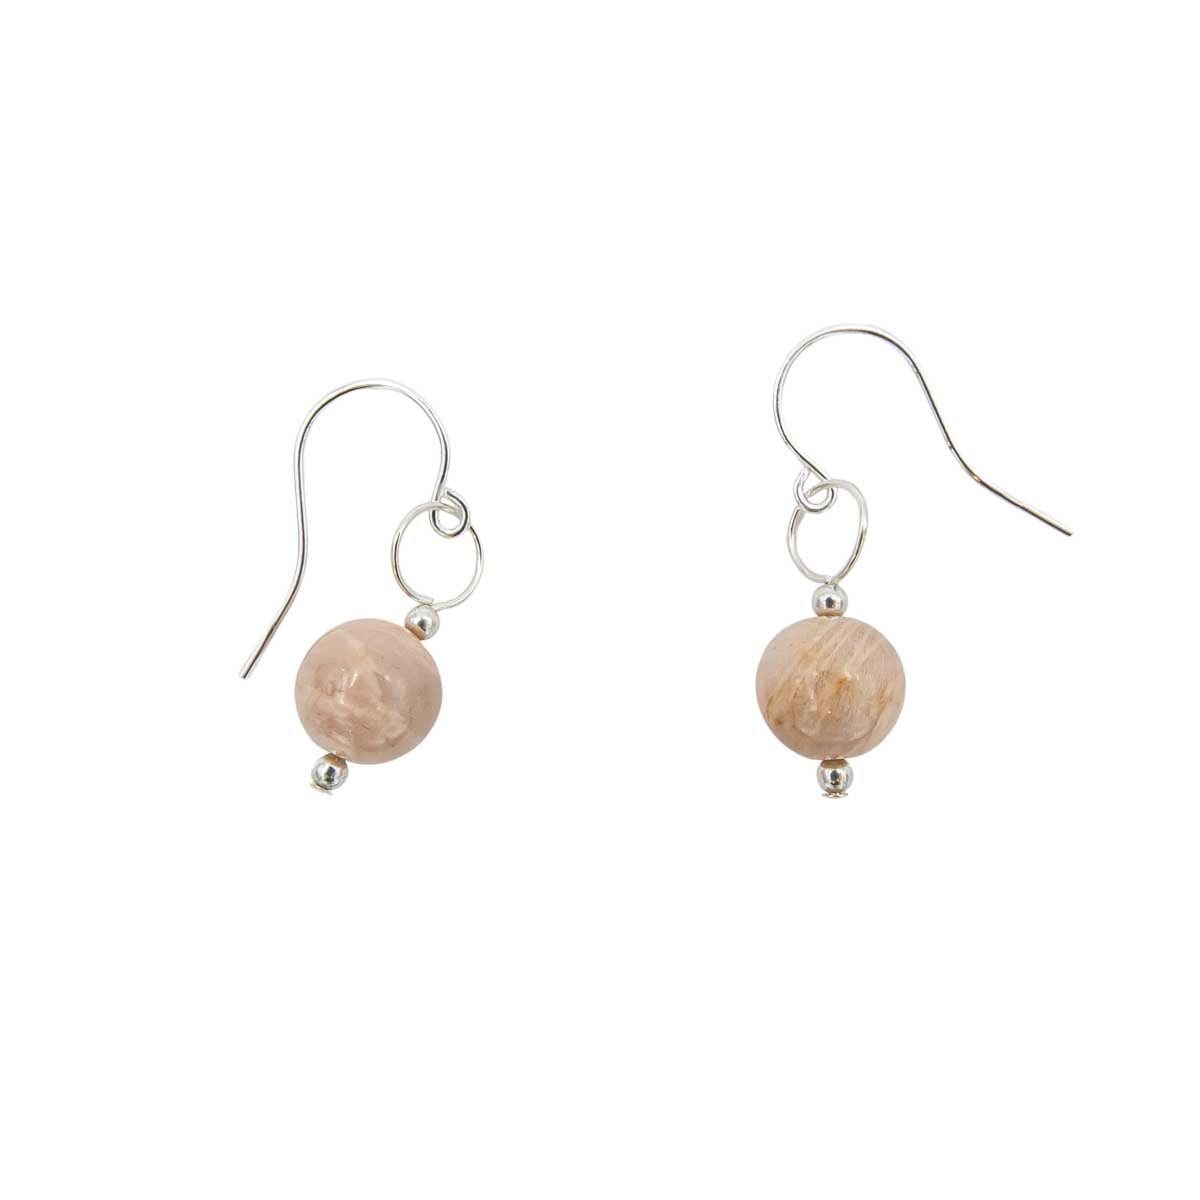 Handmade Petite Peach Moonstone Sterling Silver Natural Stone Earrings ~ Earth Song Jewelry